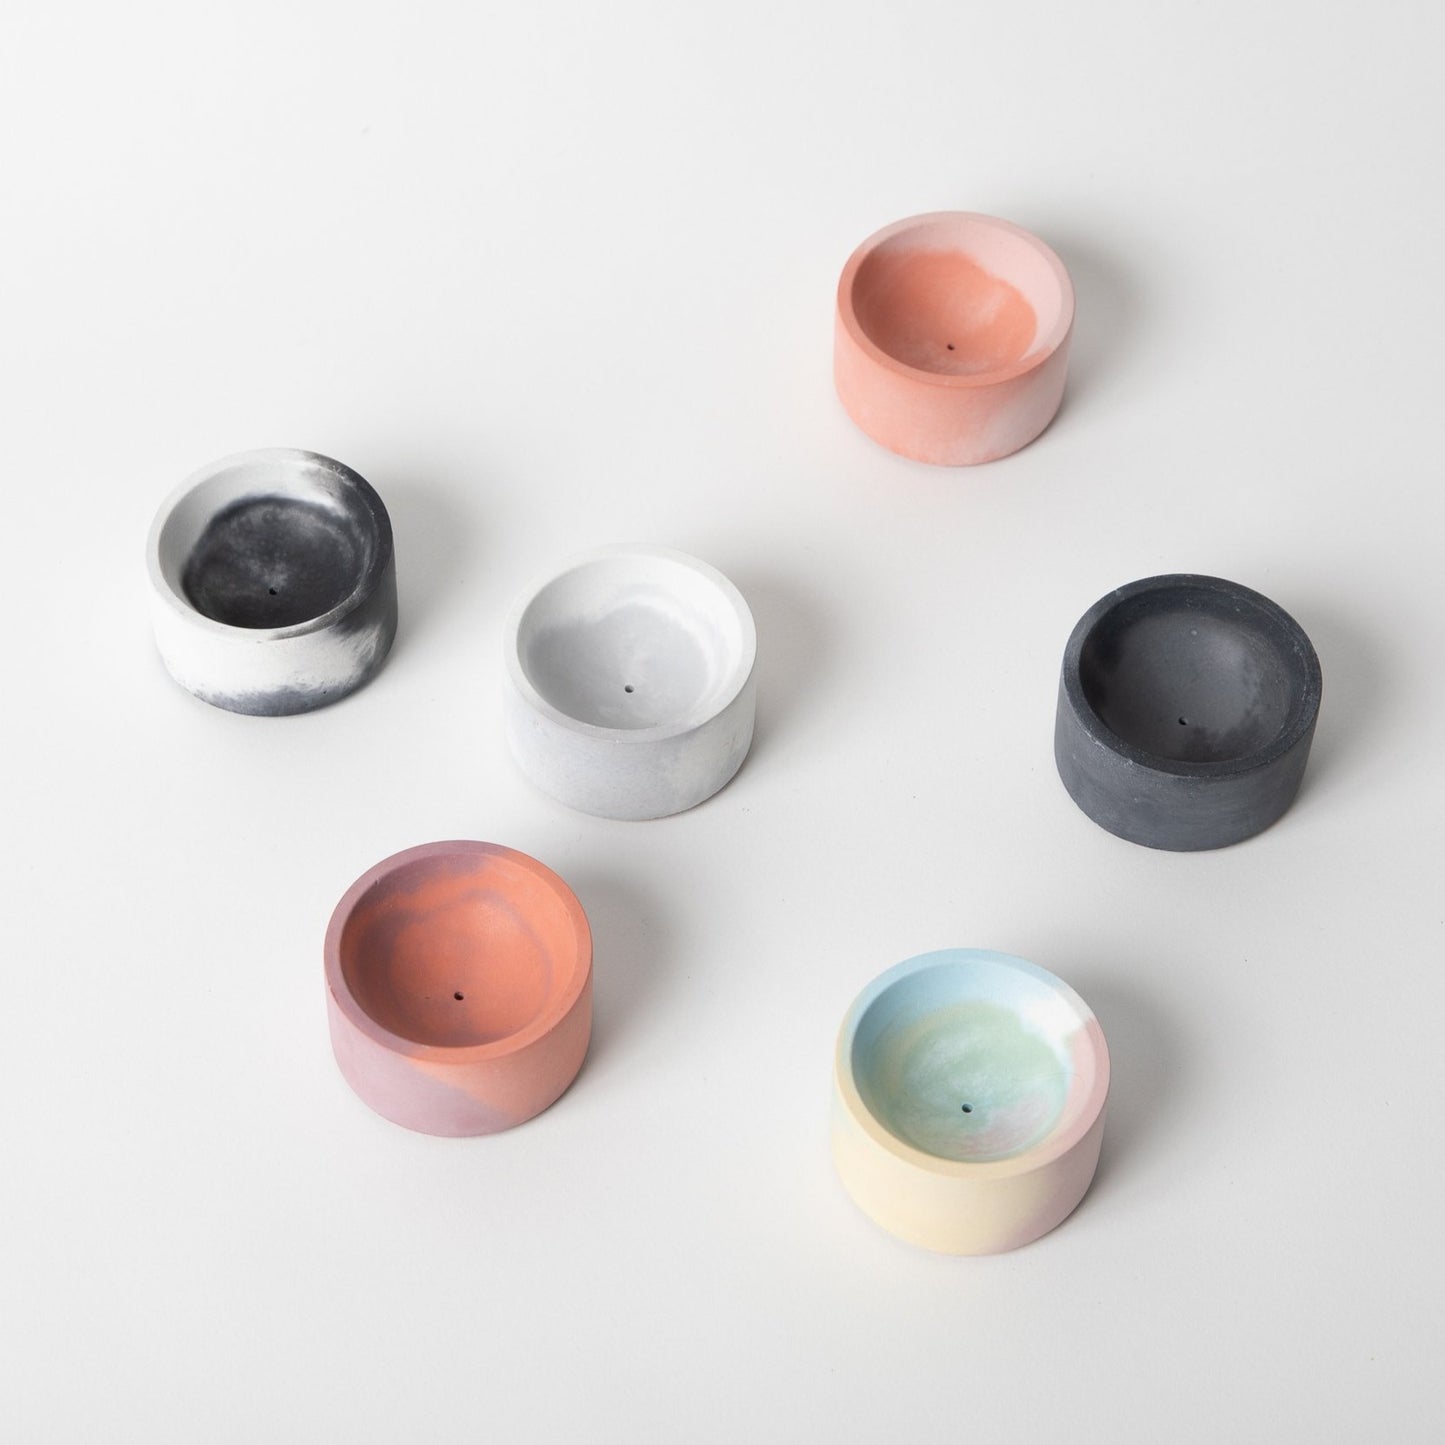 Round concrete incense holder in various colors arranged.